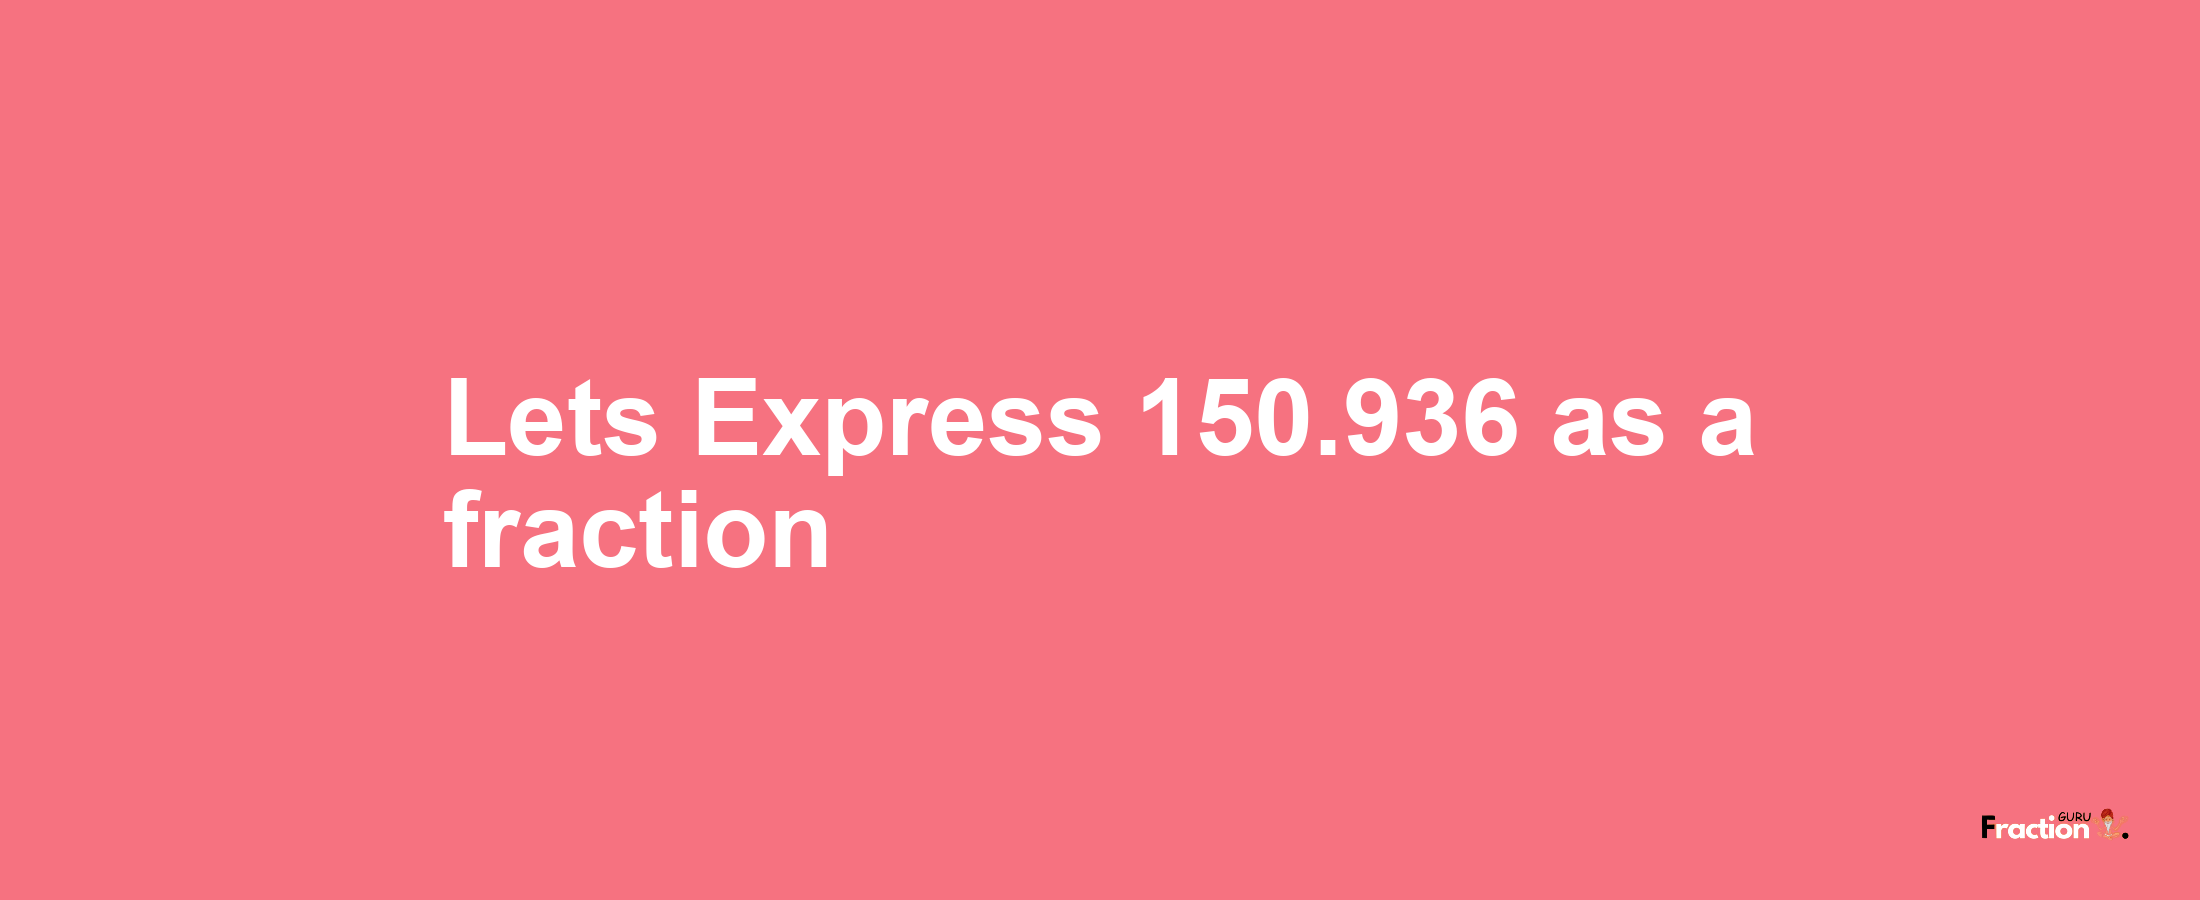 Lets Express 150.936 as afraction